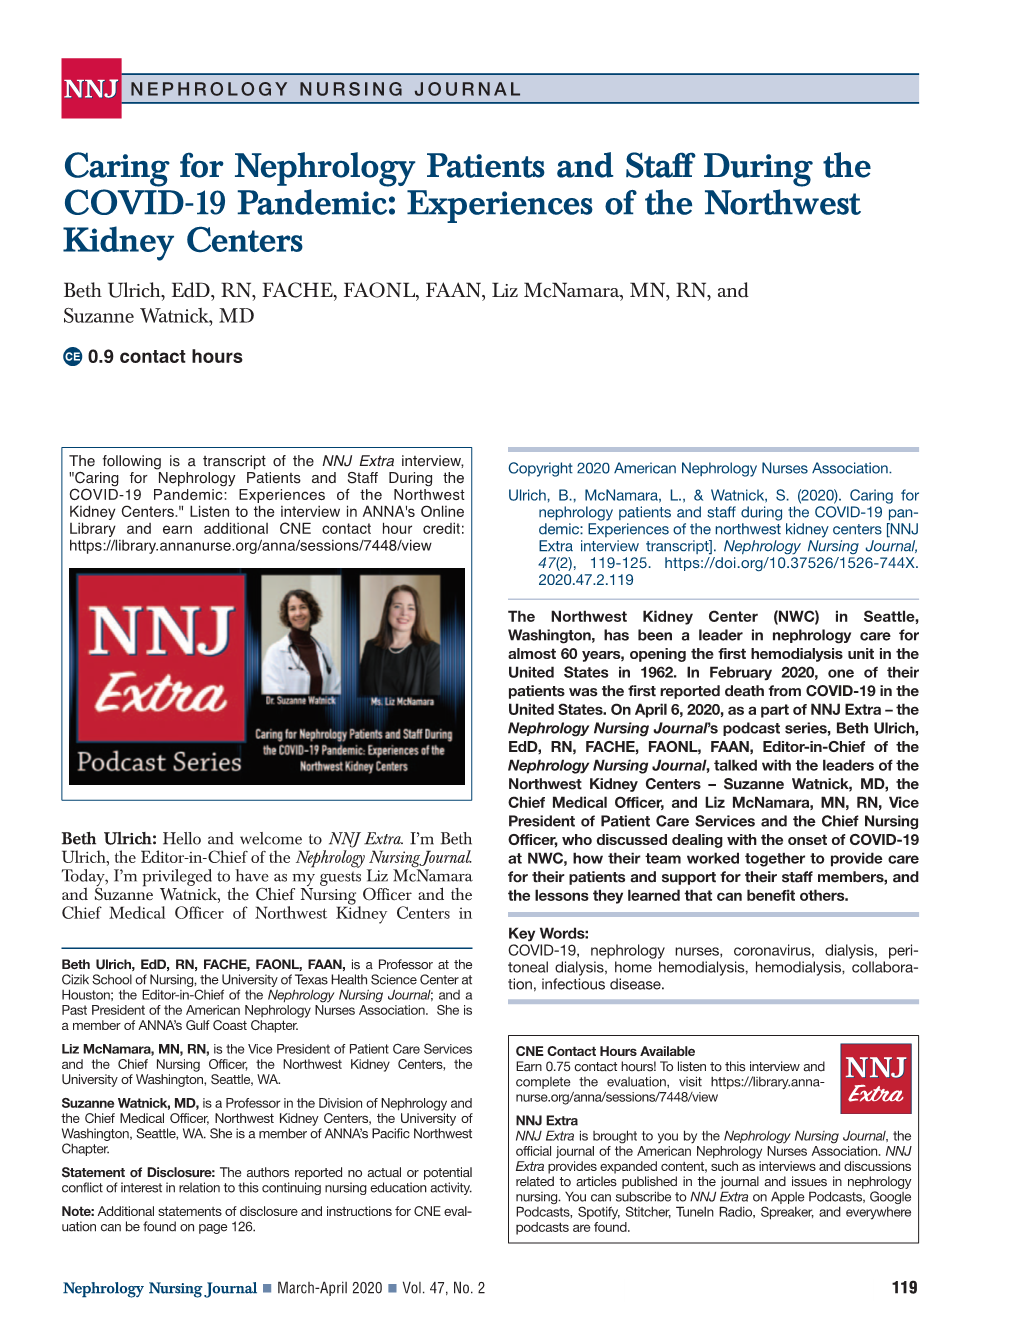 Caring for Nephrology Patients and Staff During the COVID-19 Pandemic: Experiences of the Northwest Kidney Centers